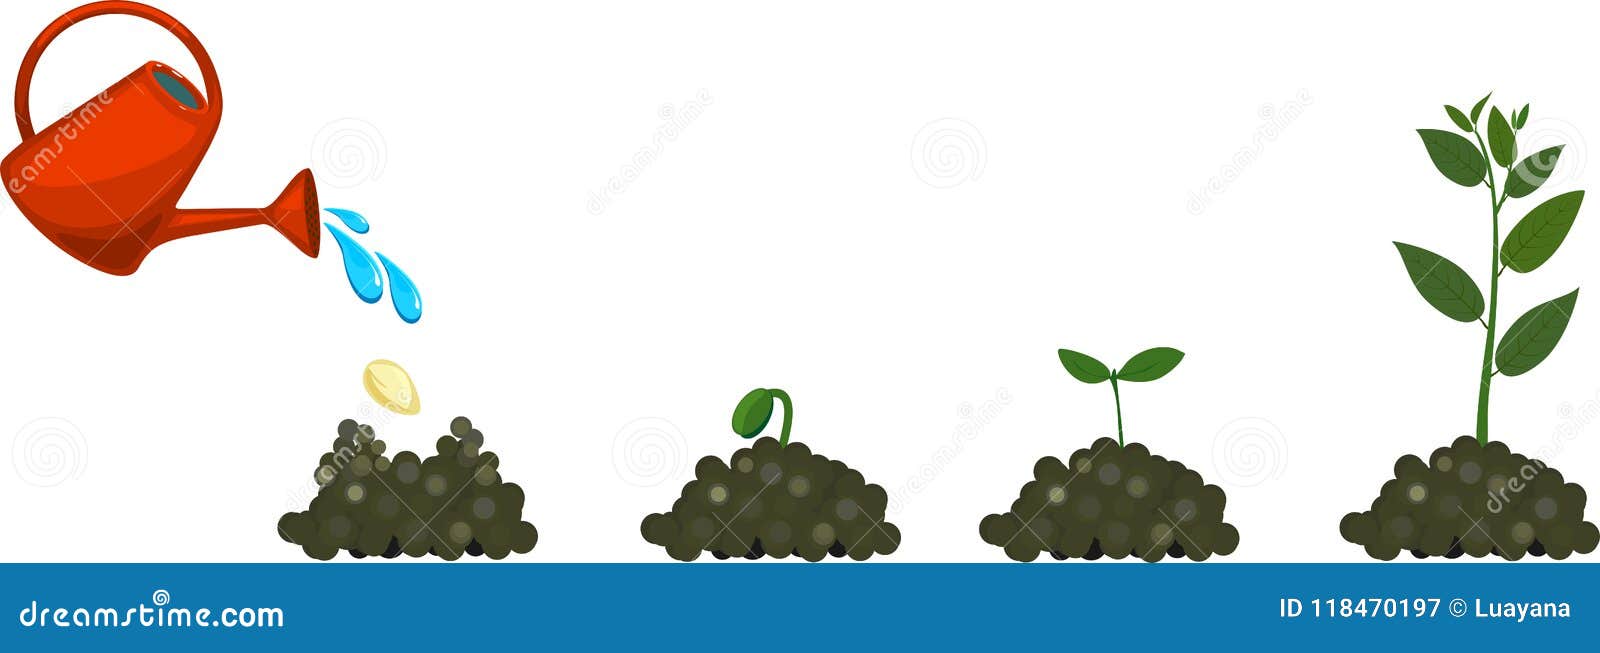 Life cycle of plant stock vector. Illustration of agriculture - 118470197